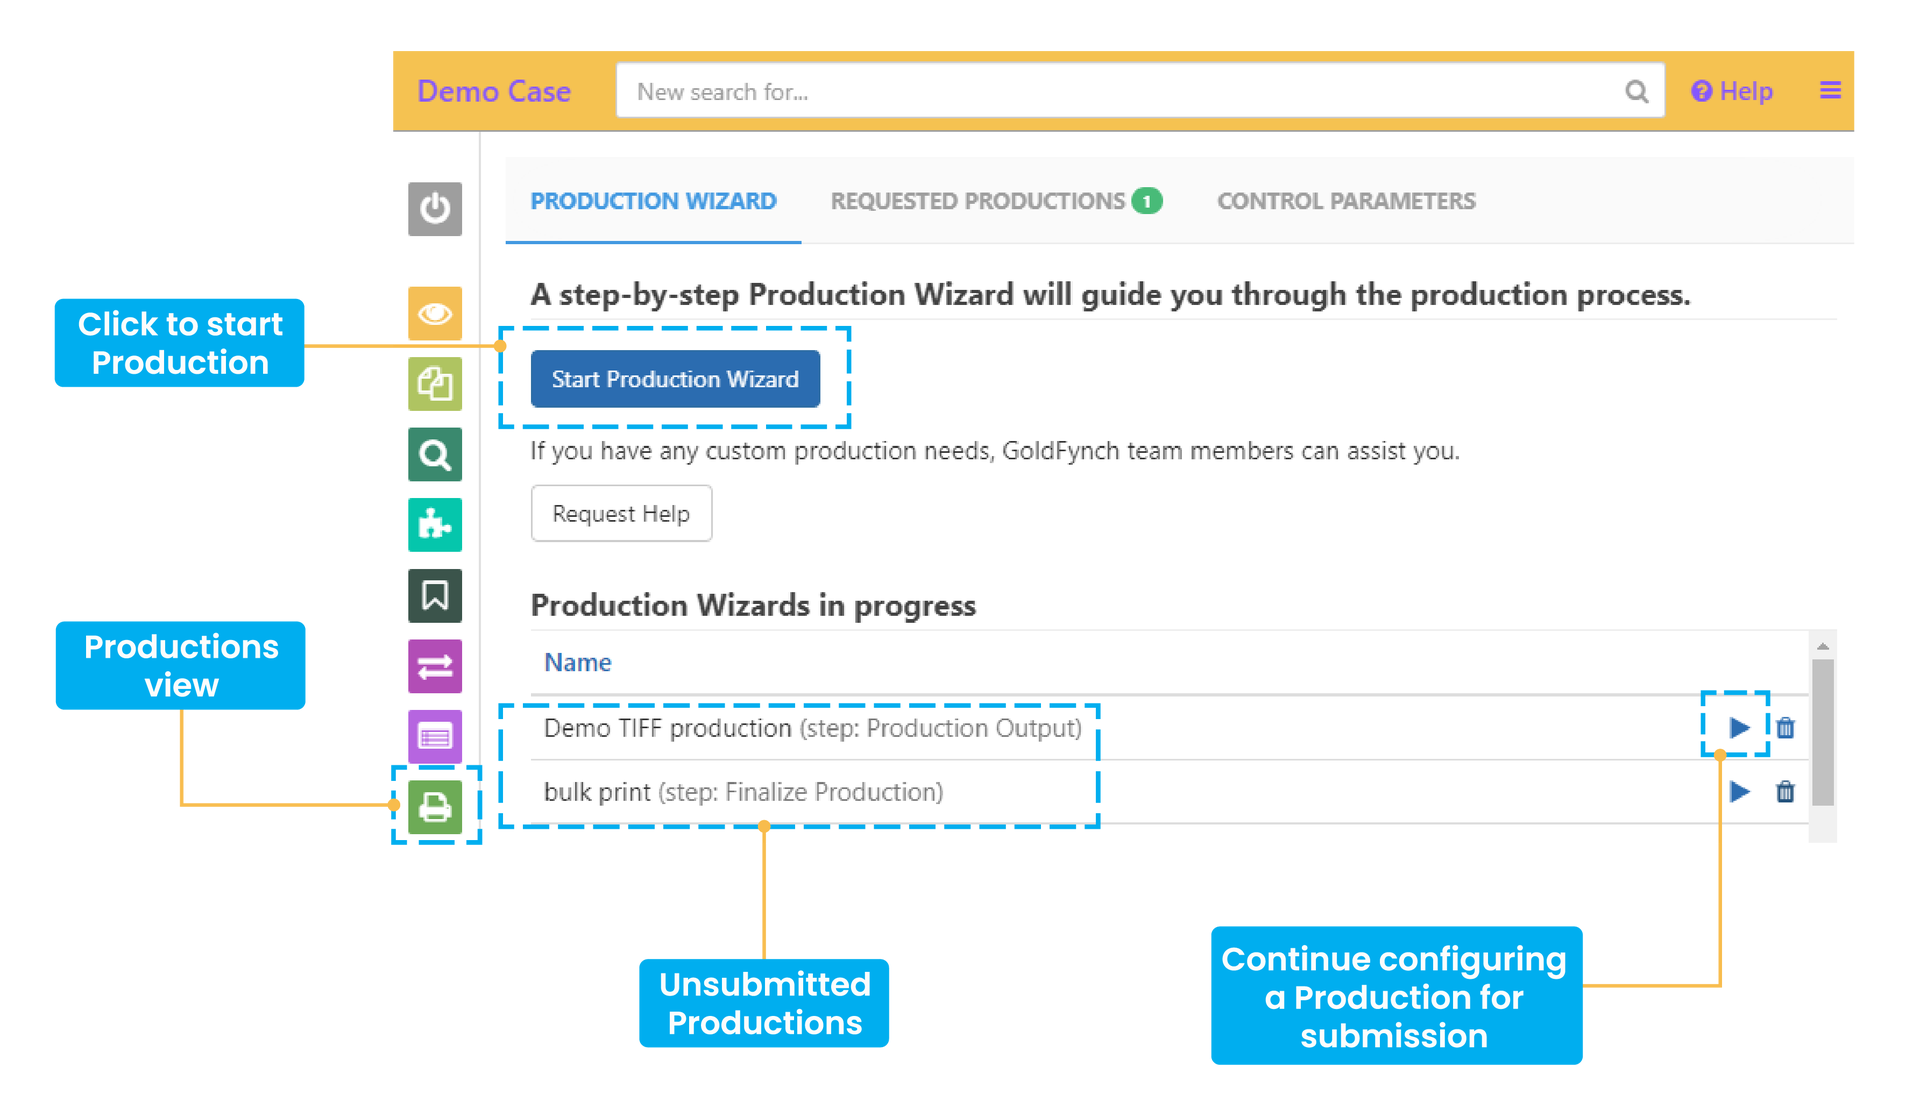 Producing files using GoldFynch’s Production Wizard